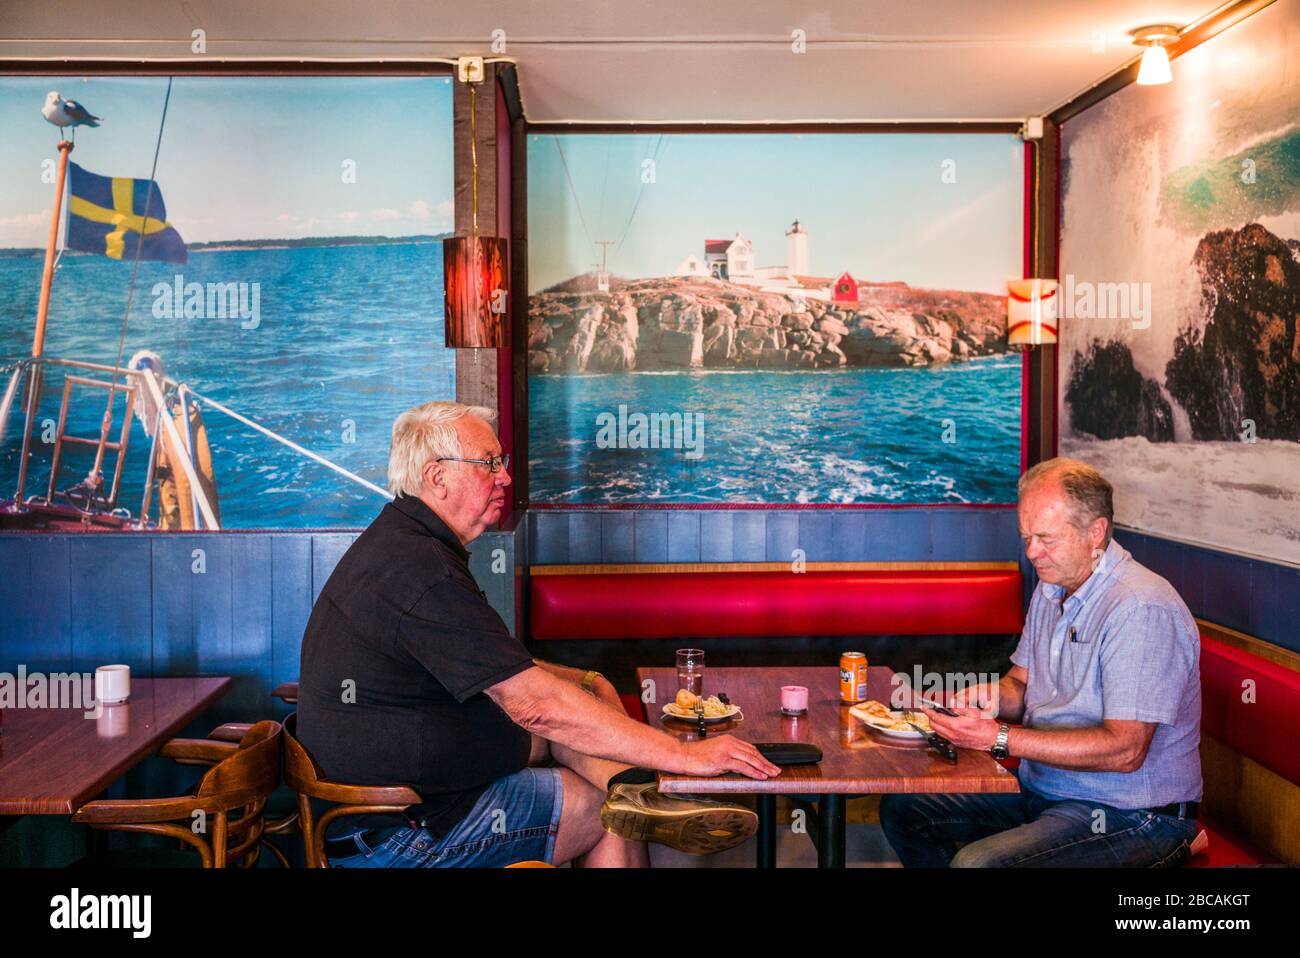 Sweden, Bohuslan, Orust Island, Ellos, two men in small cafe with poster of Nubble Light from York Beach Maine, USA Stock Photo